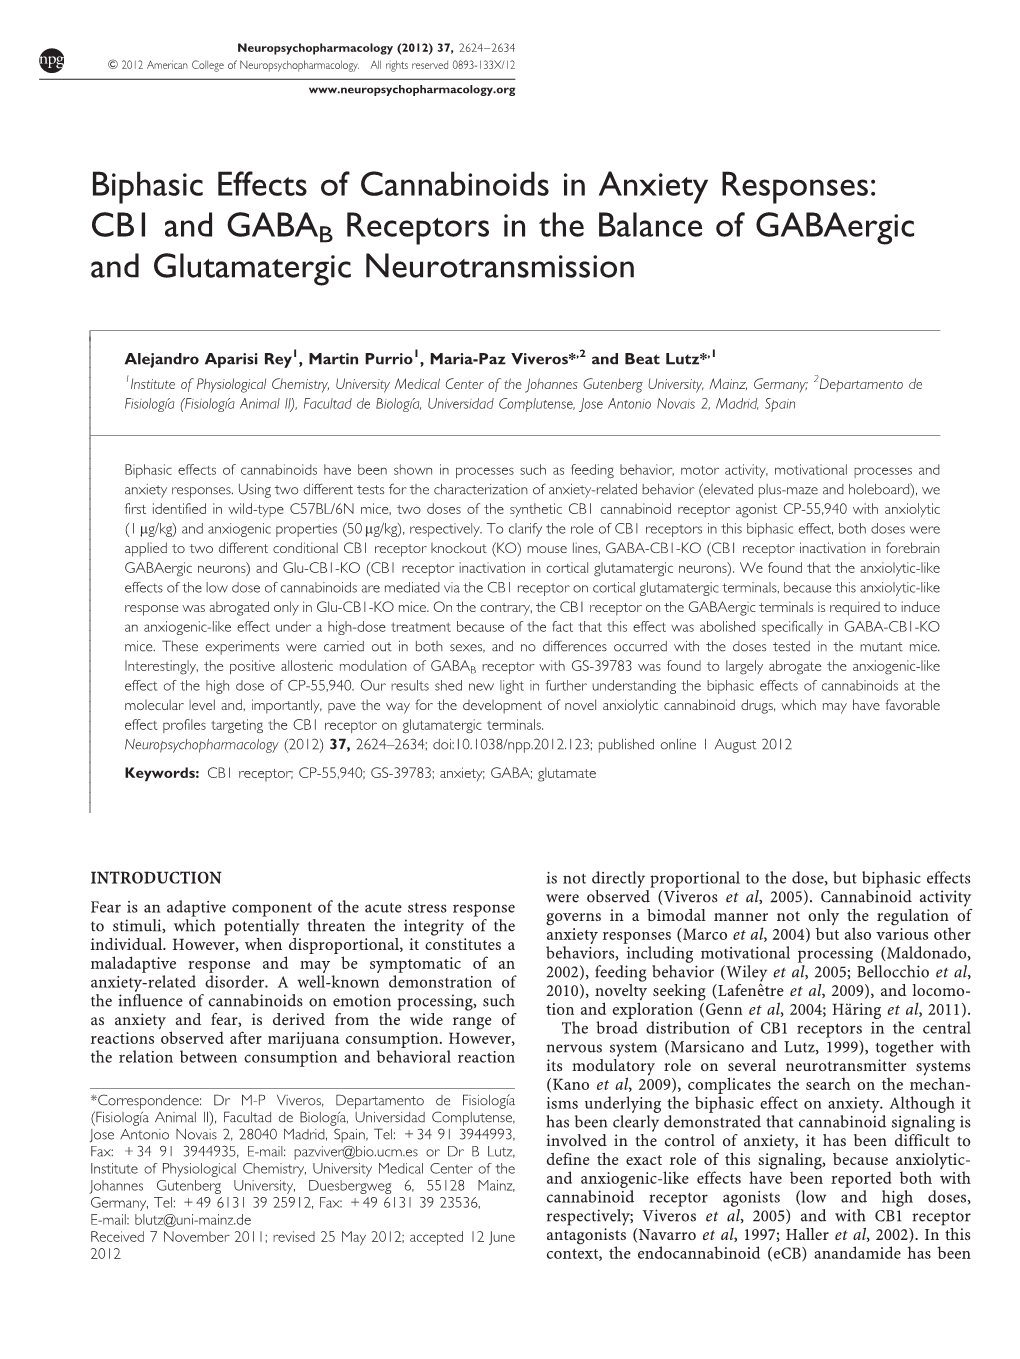 Biphasic Effects of Cannabinoids in Anxiety Responses: CB1 and GABAB Receptors in the Balance of Gabaergic and Glutamatergic Neurotransmission